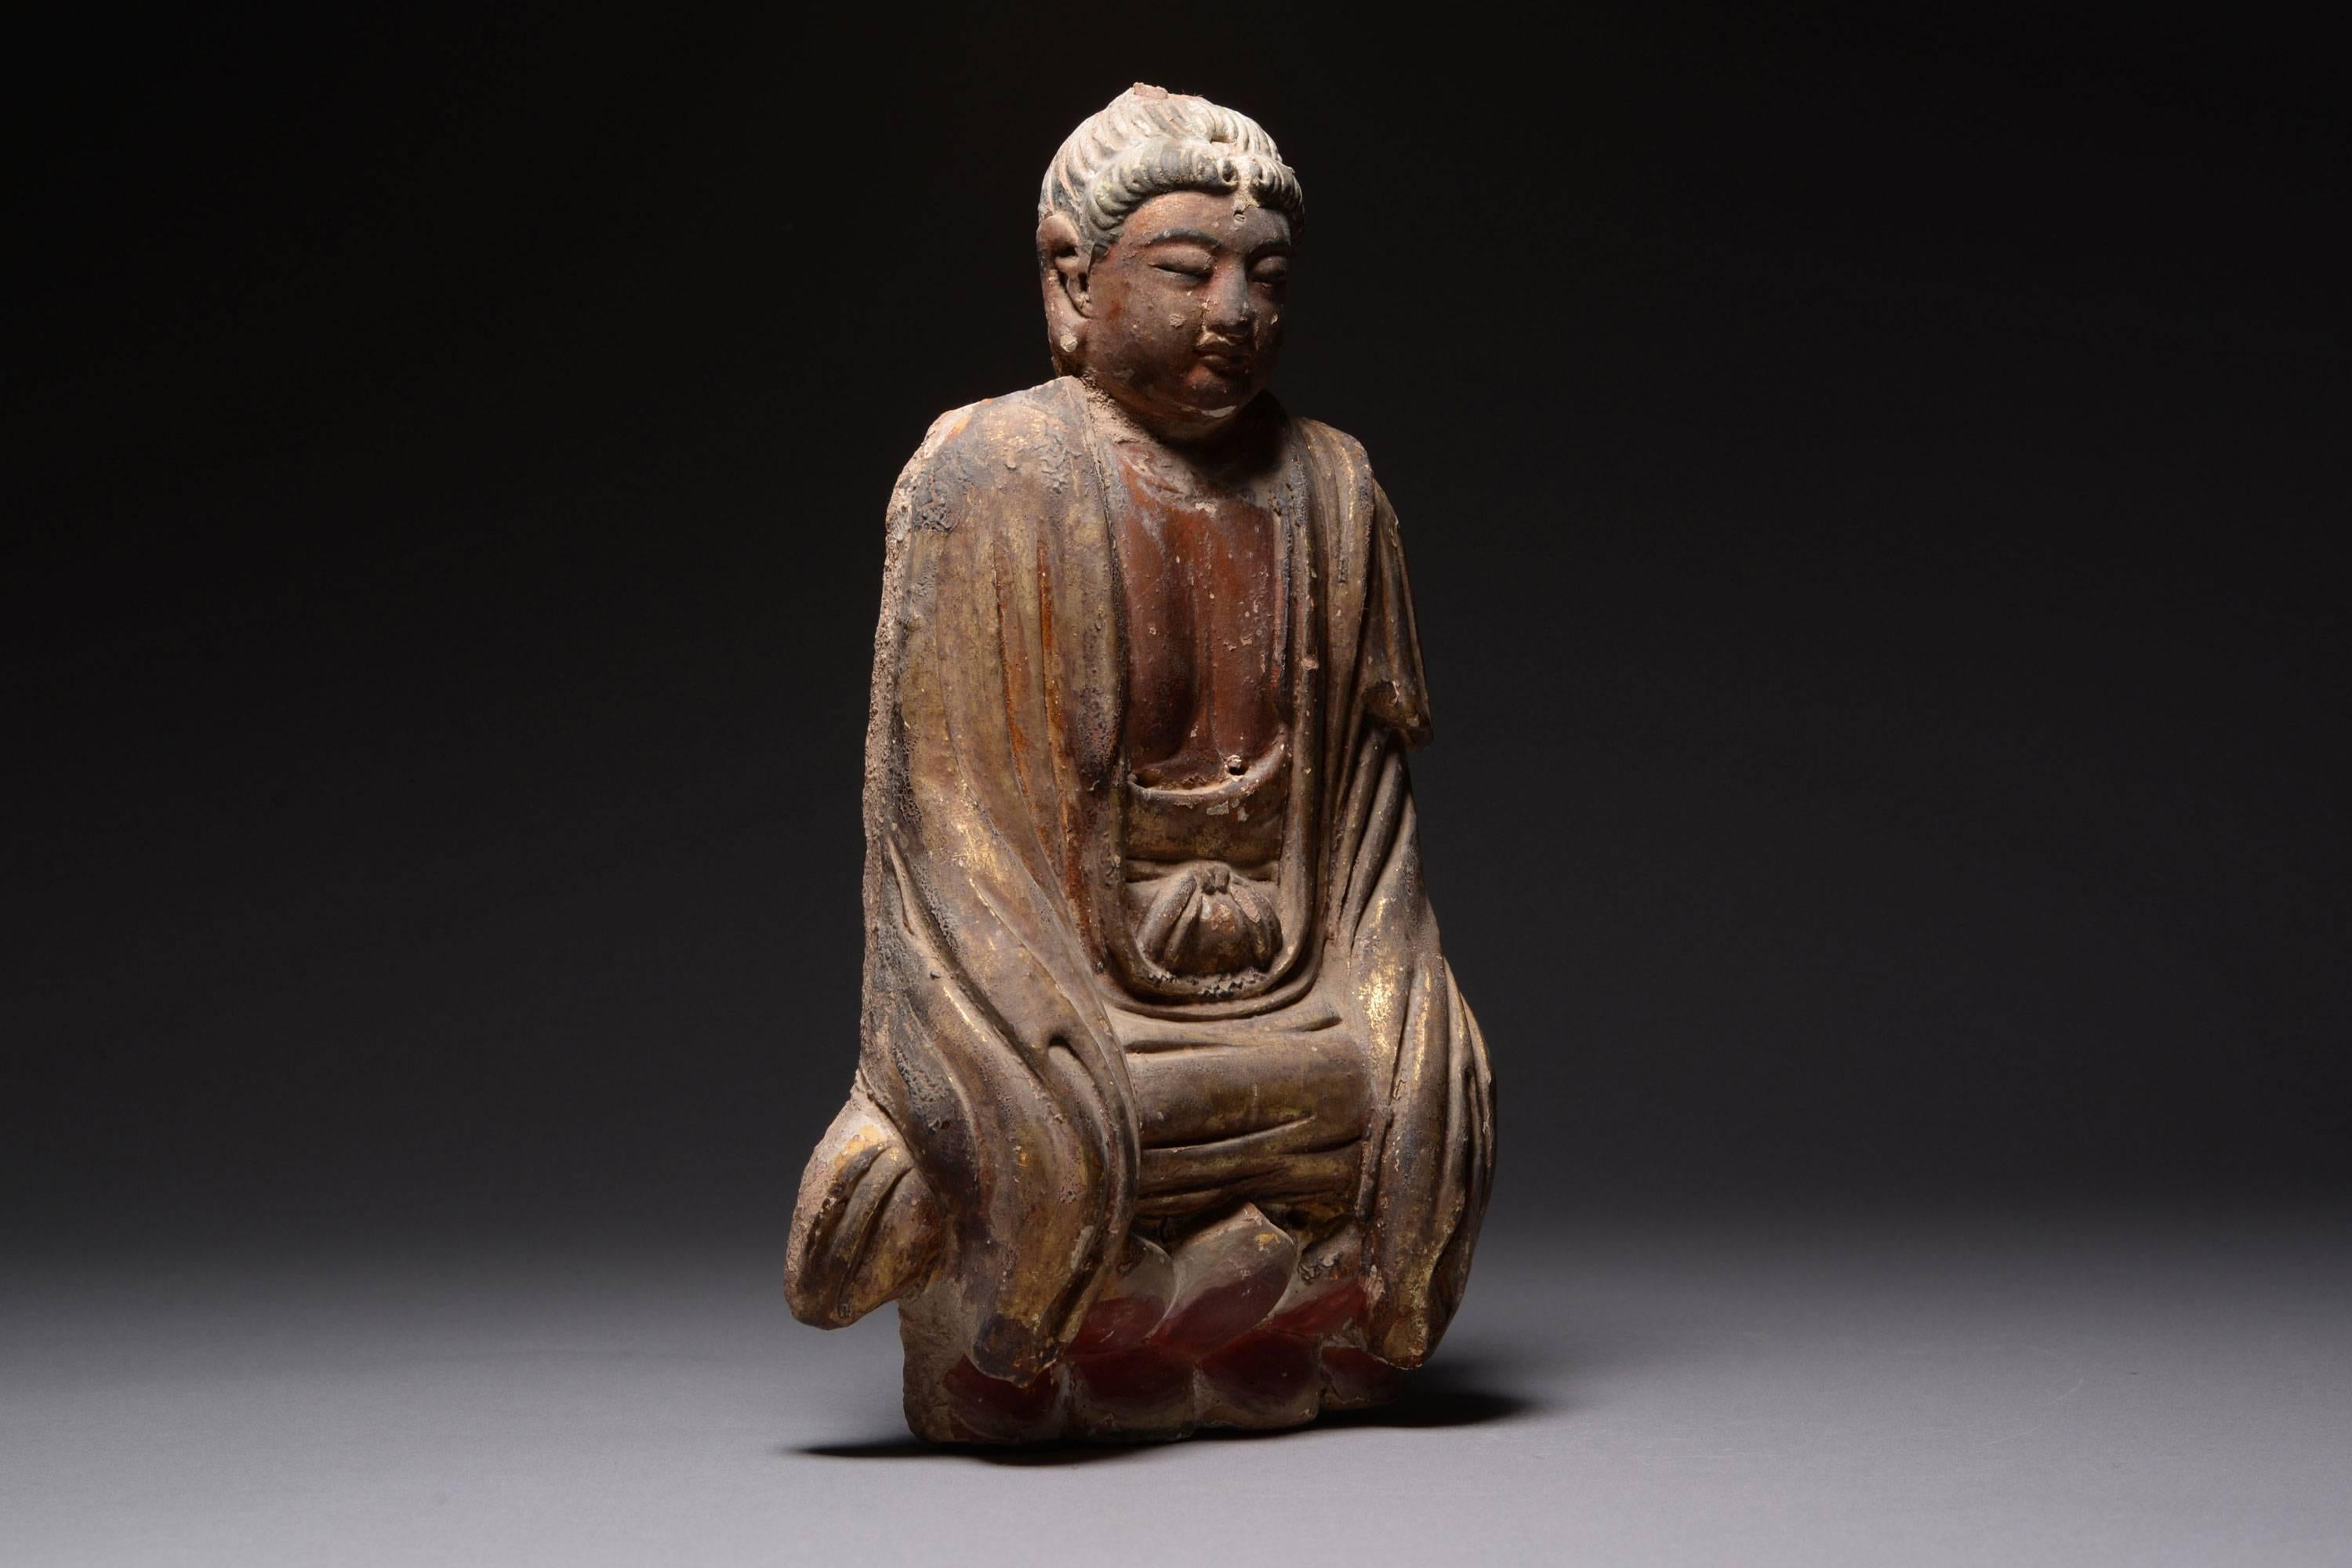 A Chinese Yuan - early Ming dynasty parcel gilt painted terracotta figure of Buddha, dating to approximately 1275 – 1400 AD.
 
This beautiful and elaborate figure of Buddha is a relatively unusual example of medieval Chinese art, being composed of